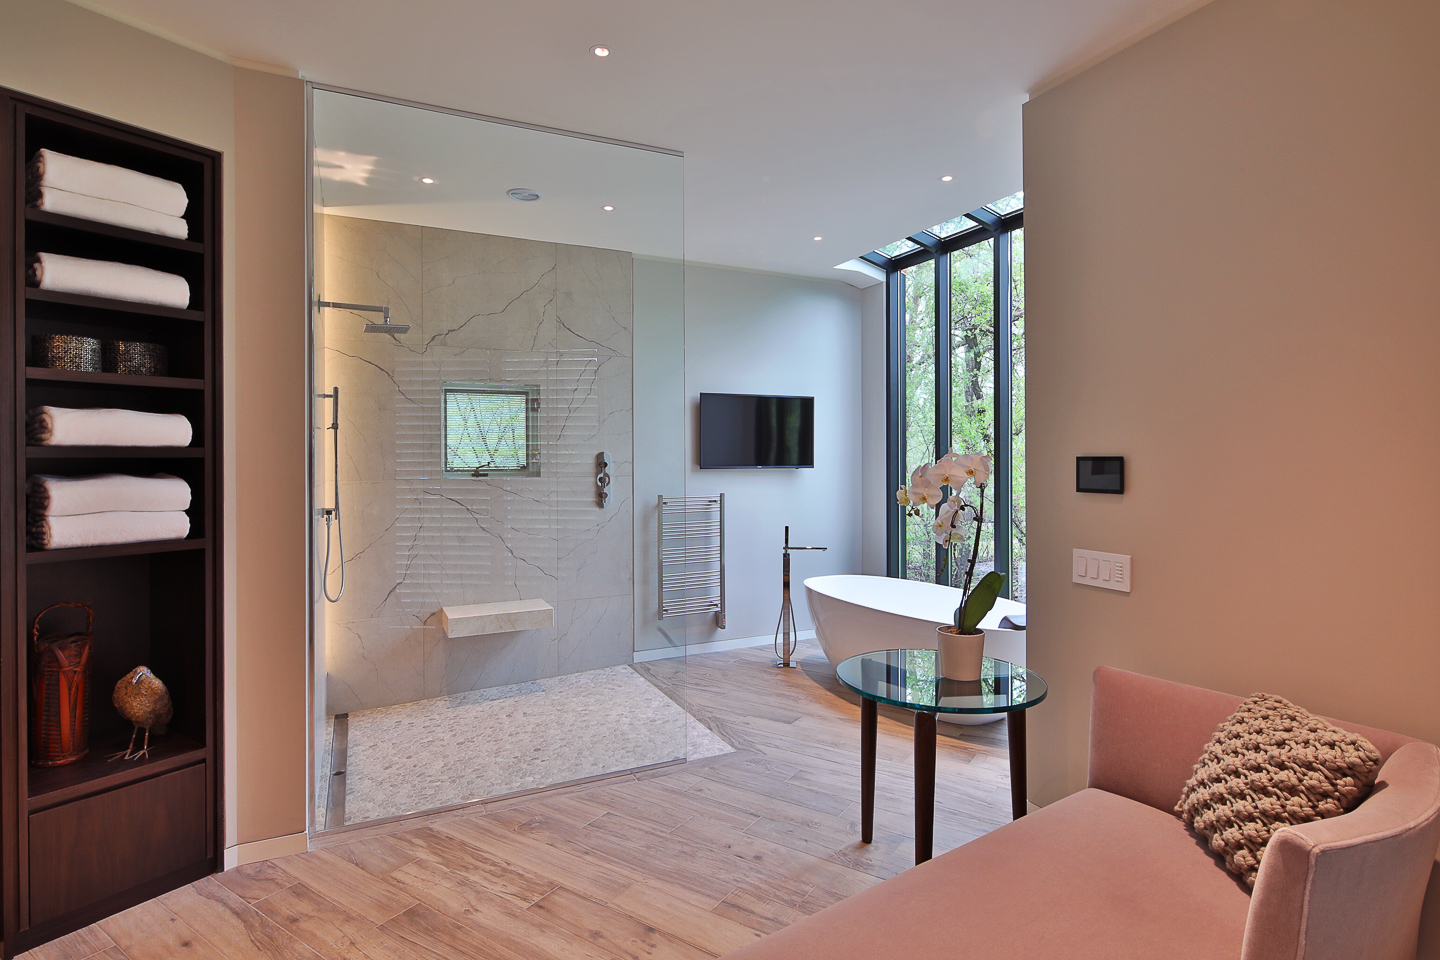 a nice sitting area at the central hub of the master bath suite, photographed by Jacob Rosenfeld